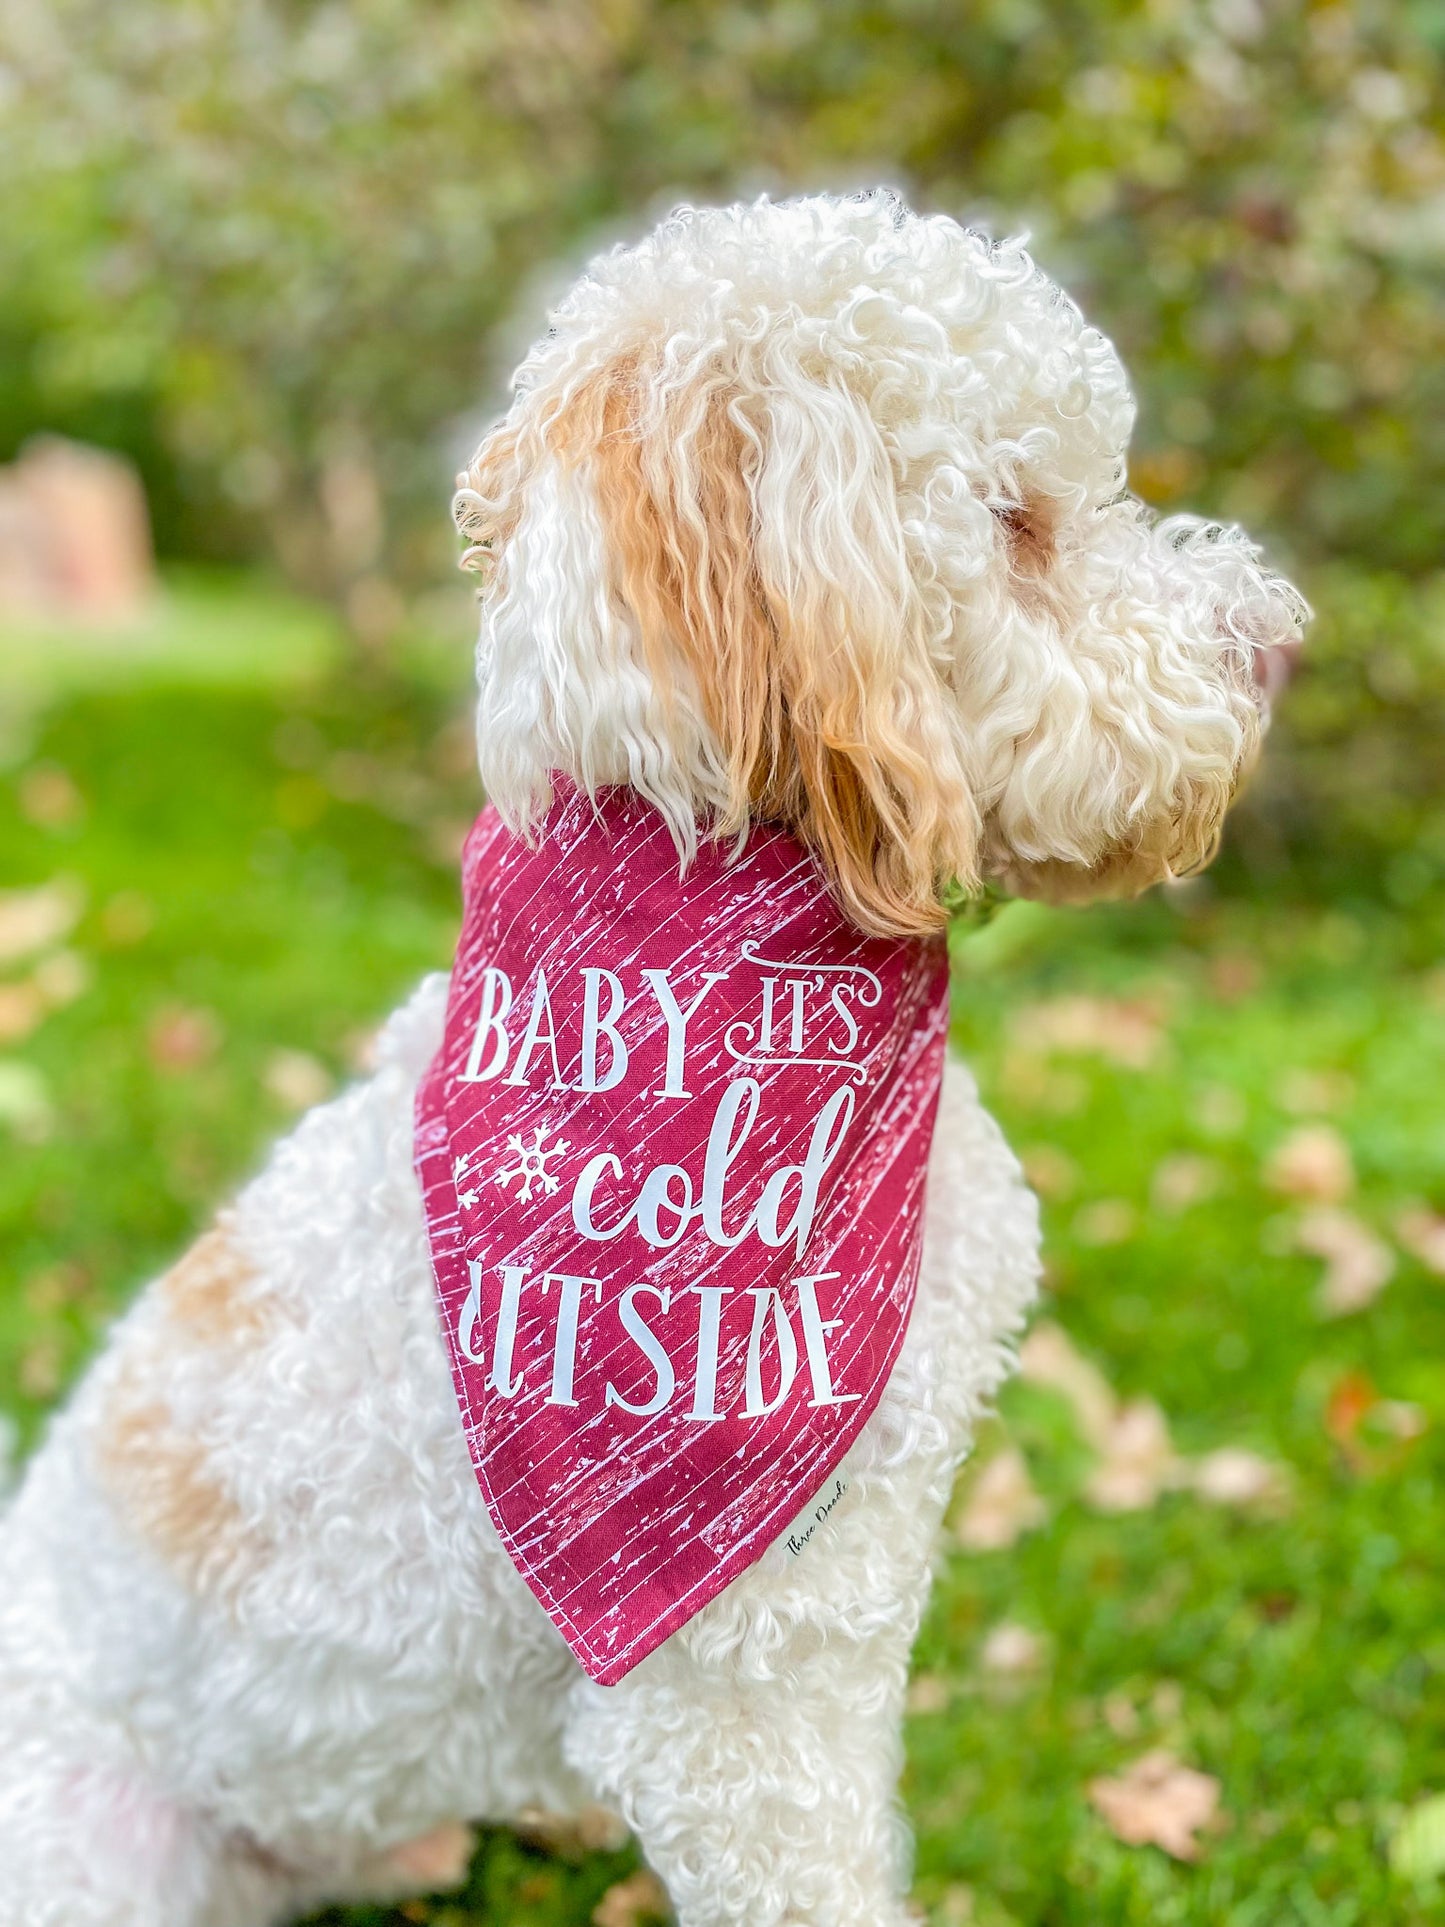 Baby it's cold outside Vinyl Add-on